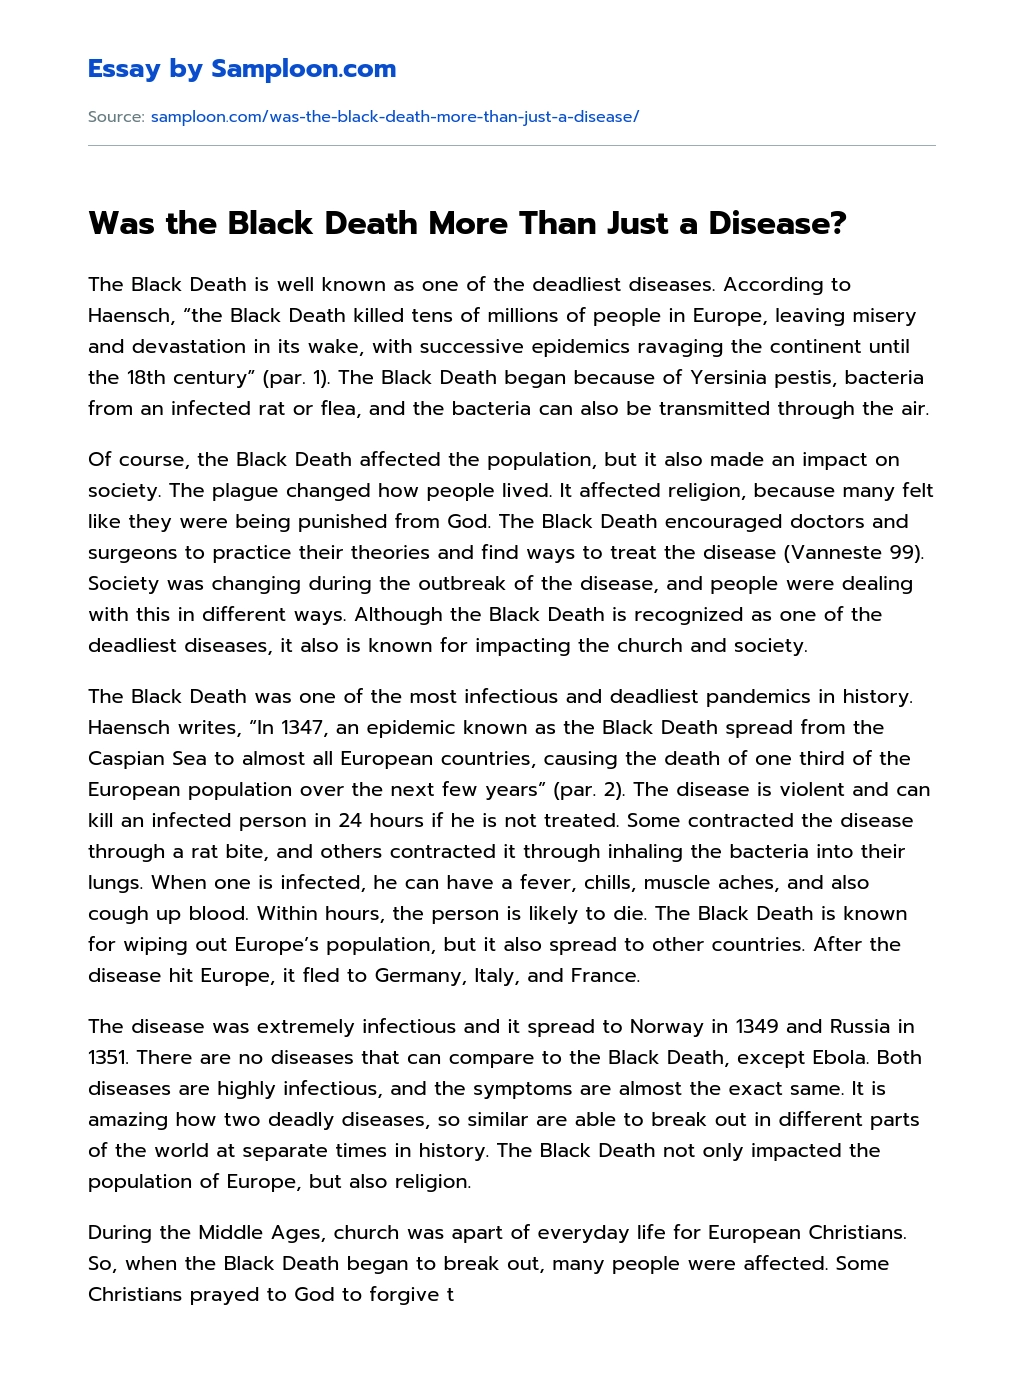 Was the Black Death More Than Just a Disease? essay